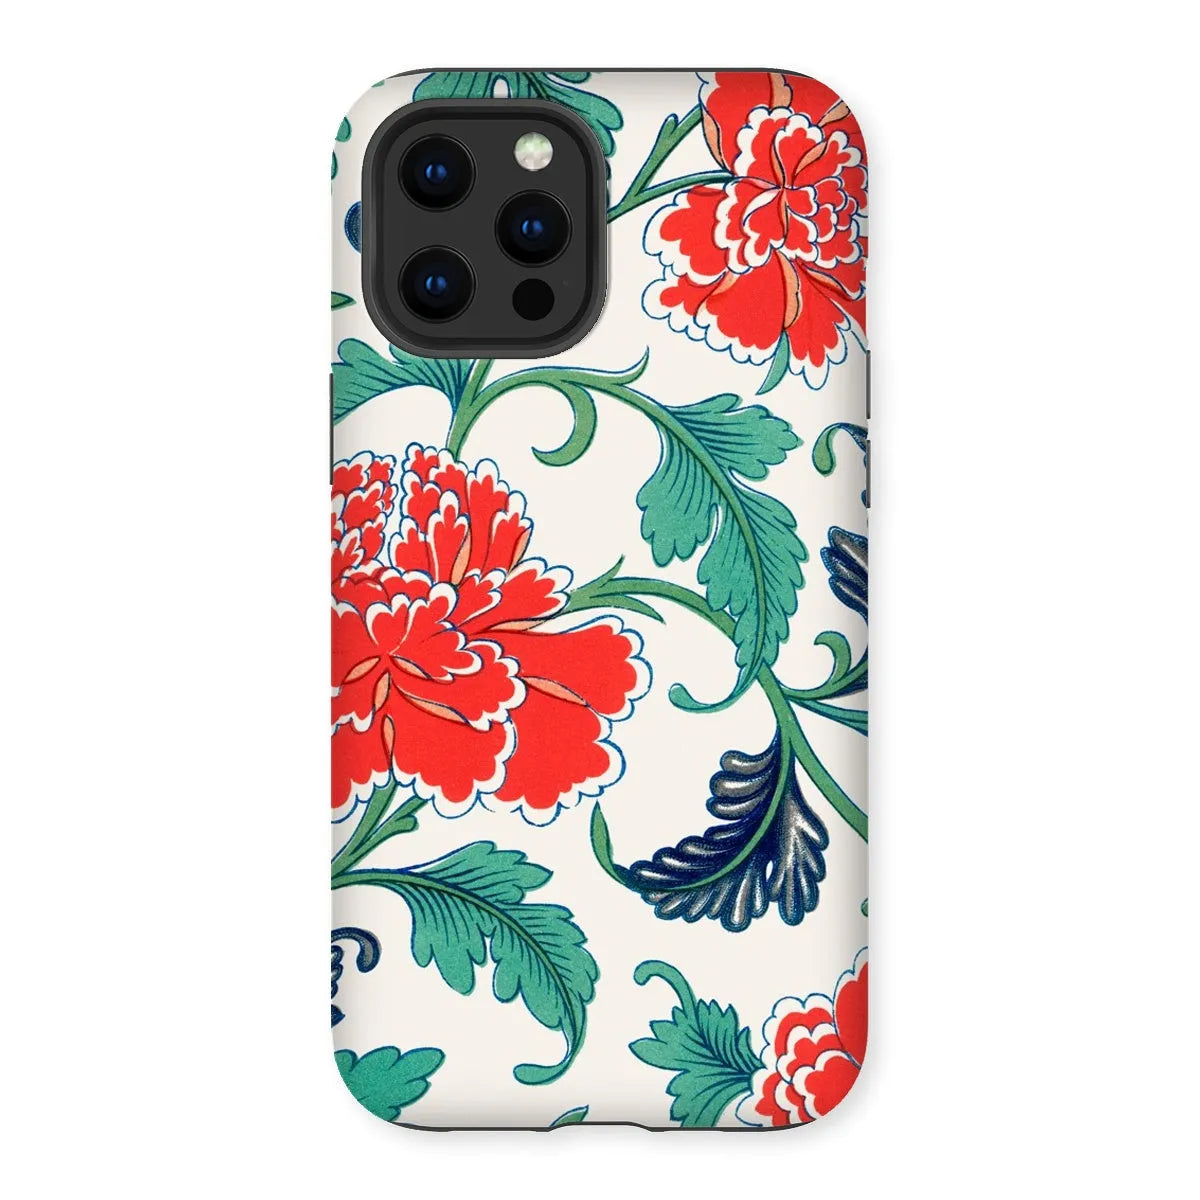 Red Floral Chinese Aesthetic Pattern Phone Case - Owen Jones - Iphone 12 Pro Max / Matte - Mobile Phone Cases